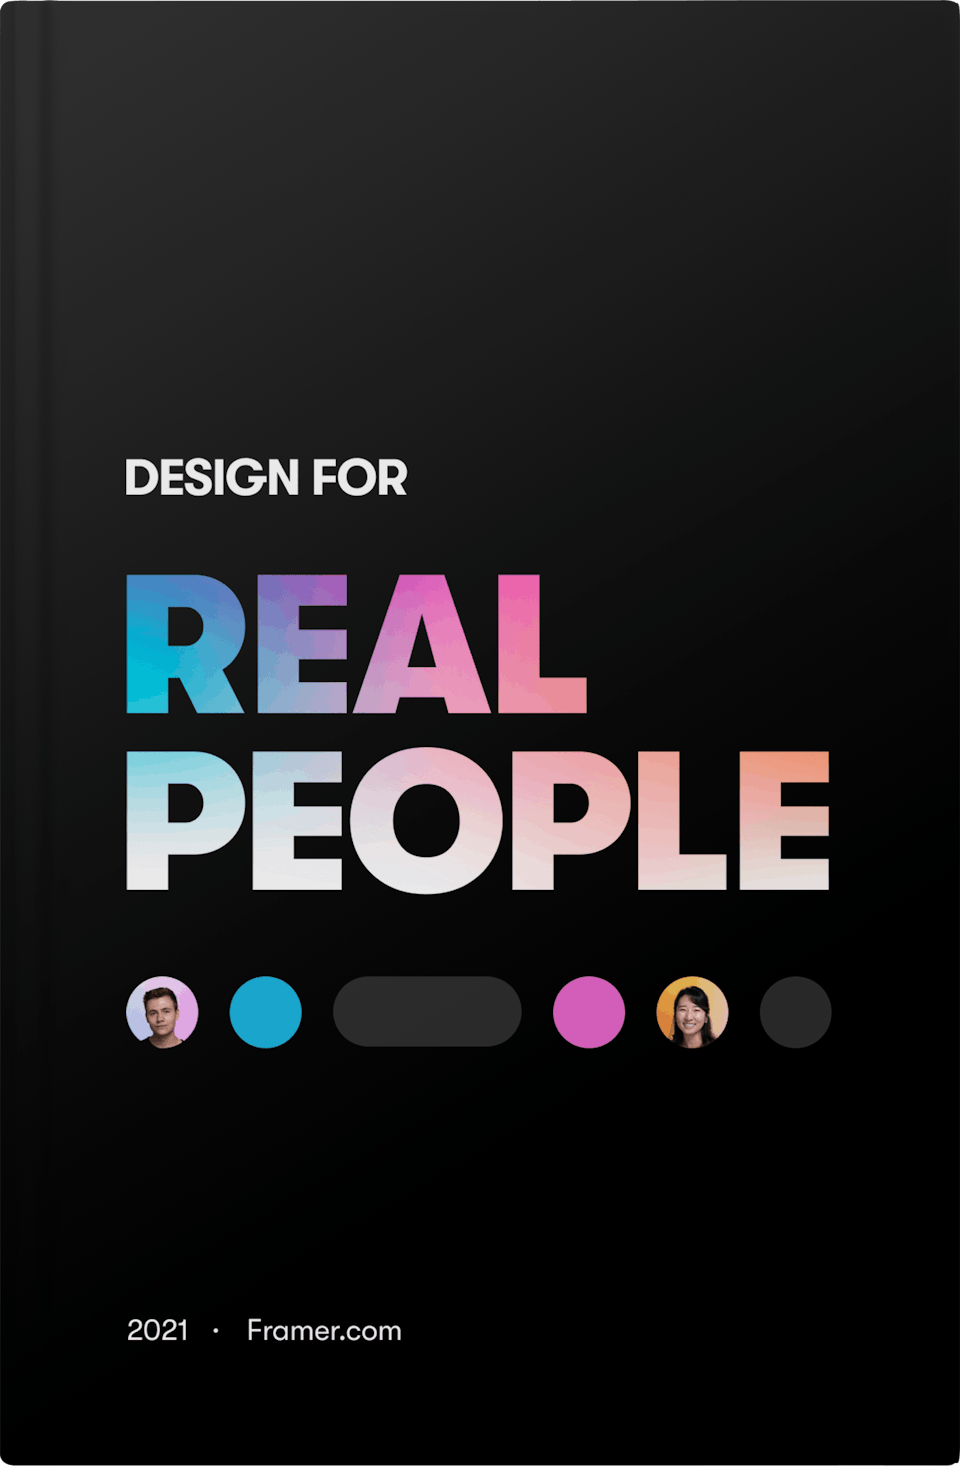 Design for Real People